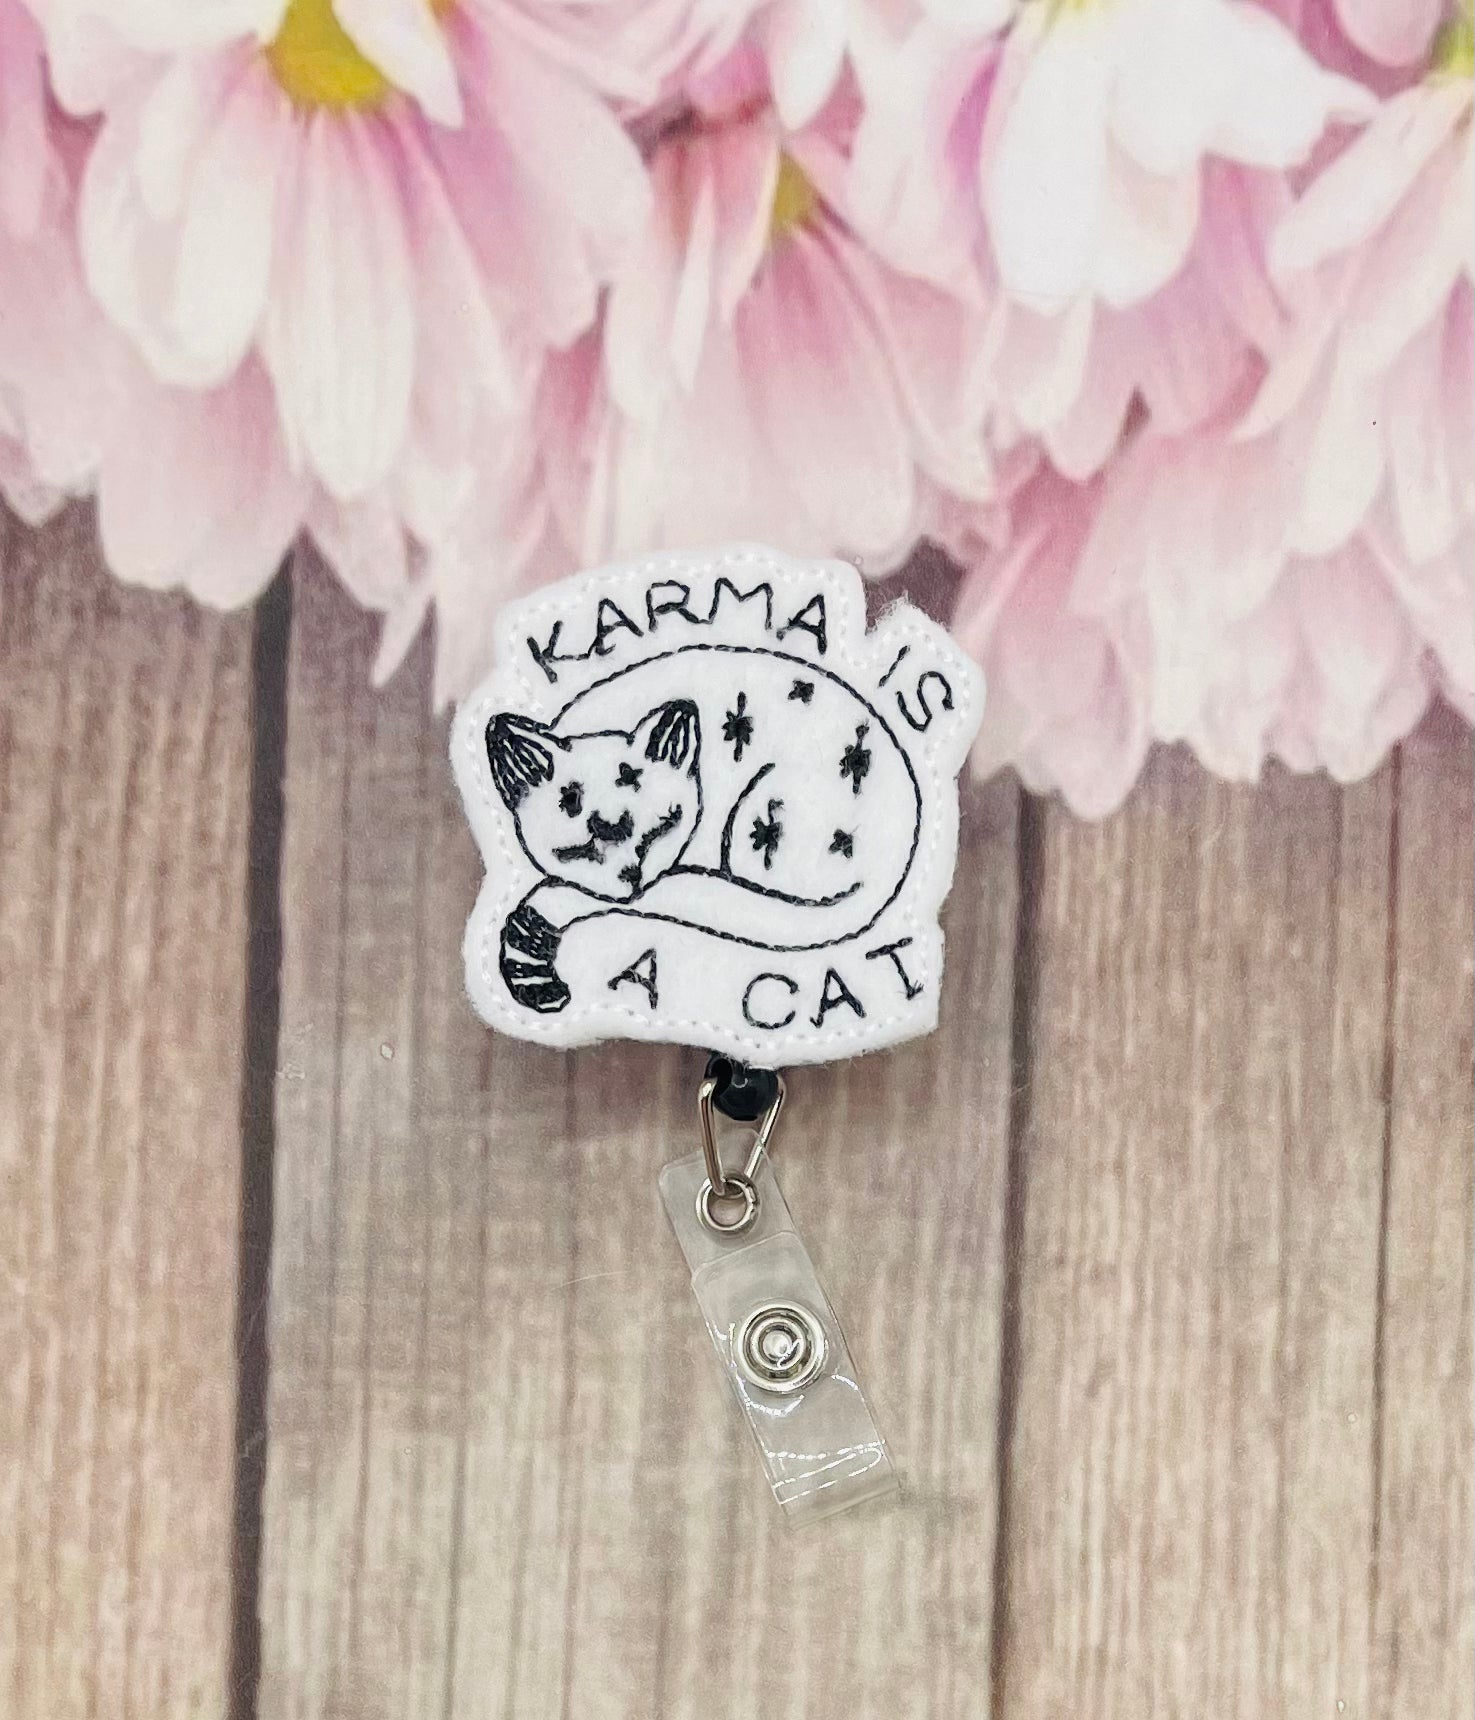 Taylor swift themed badge reels Karma is a cat